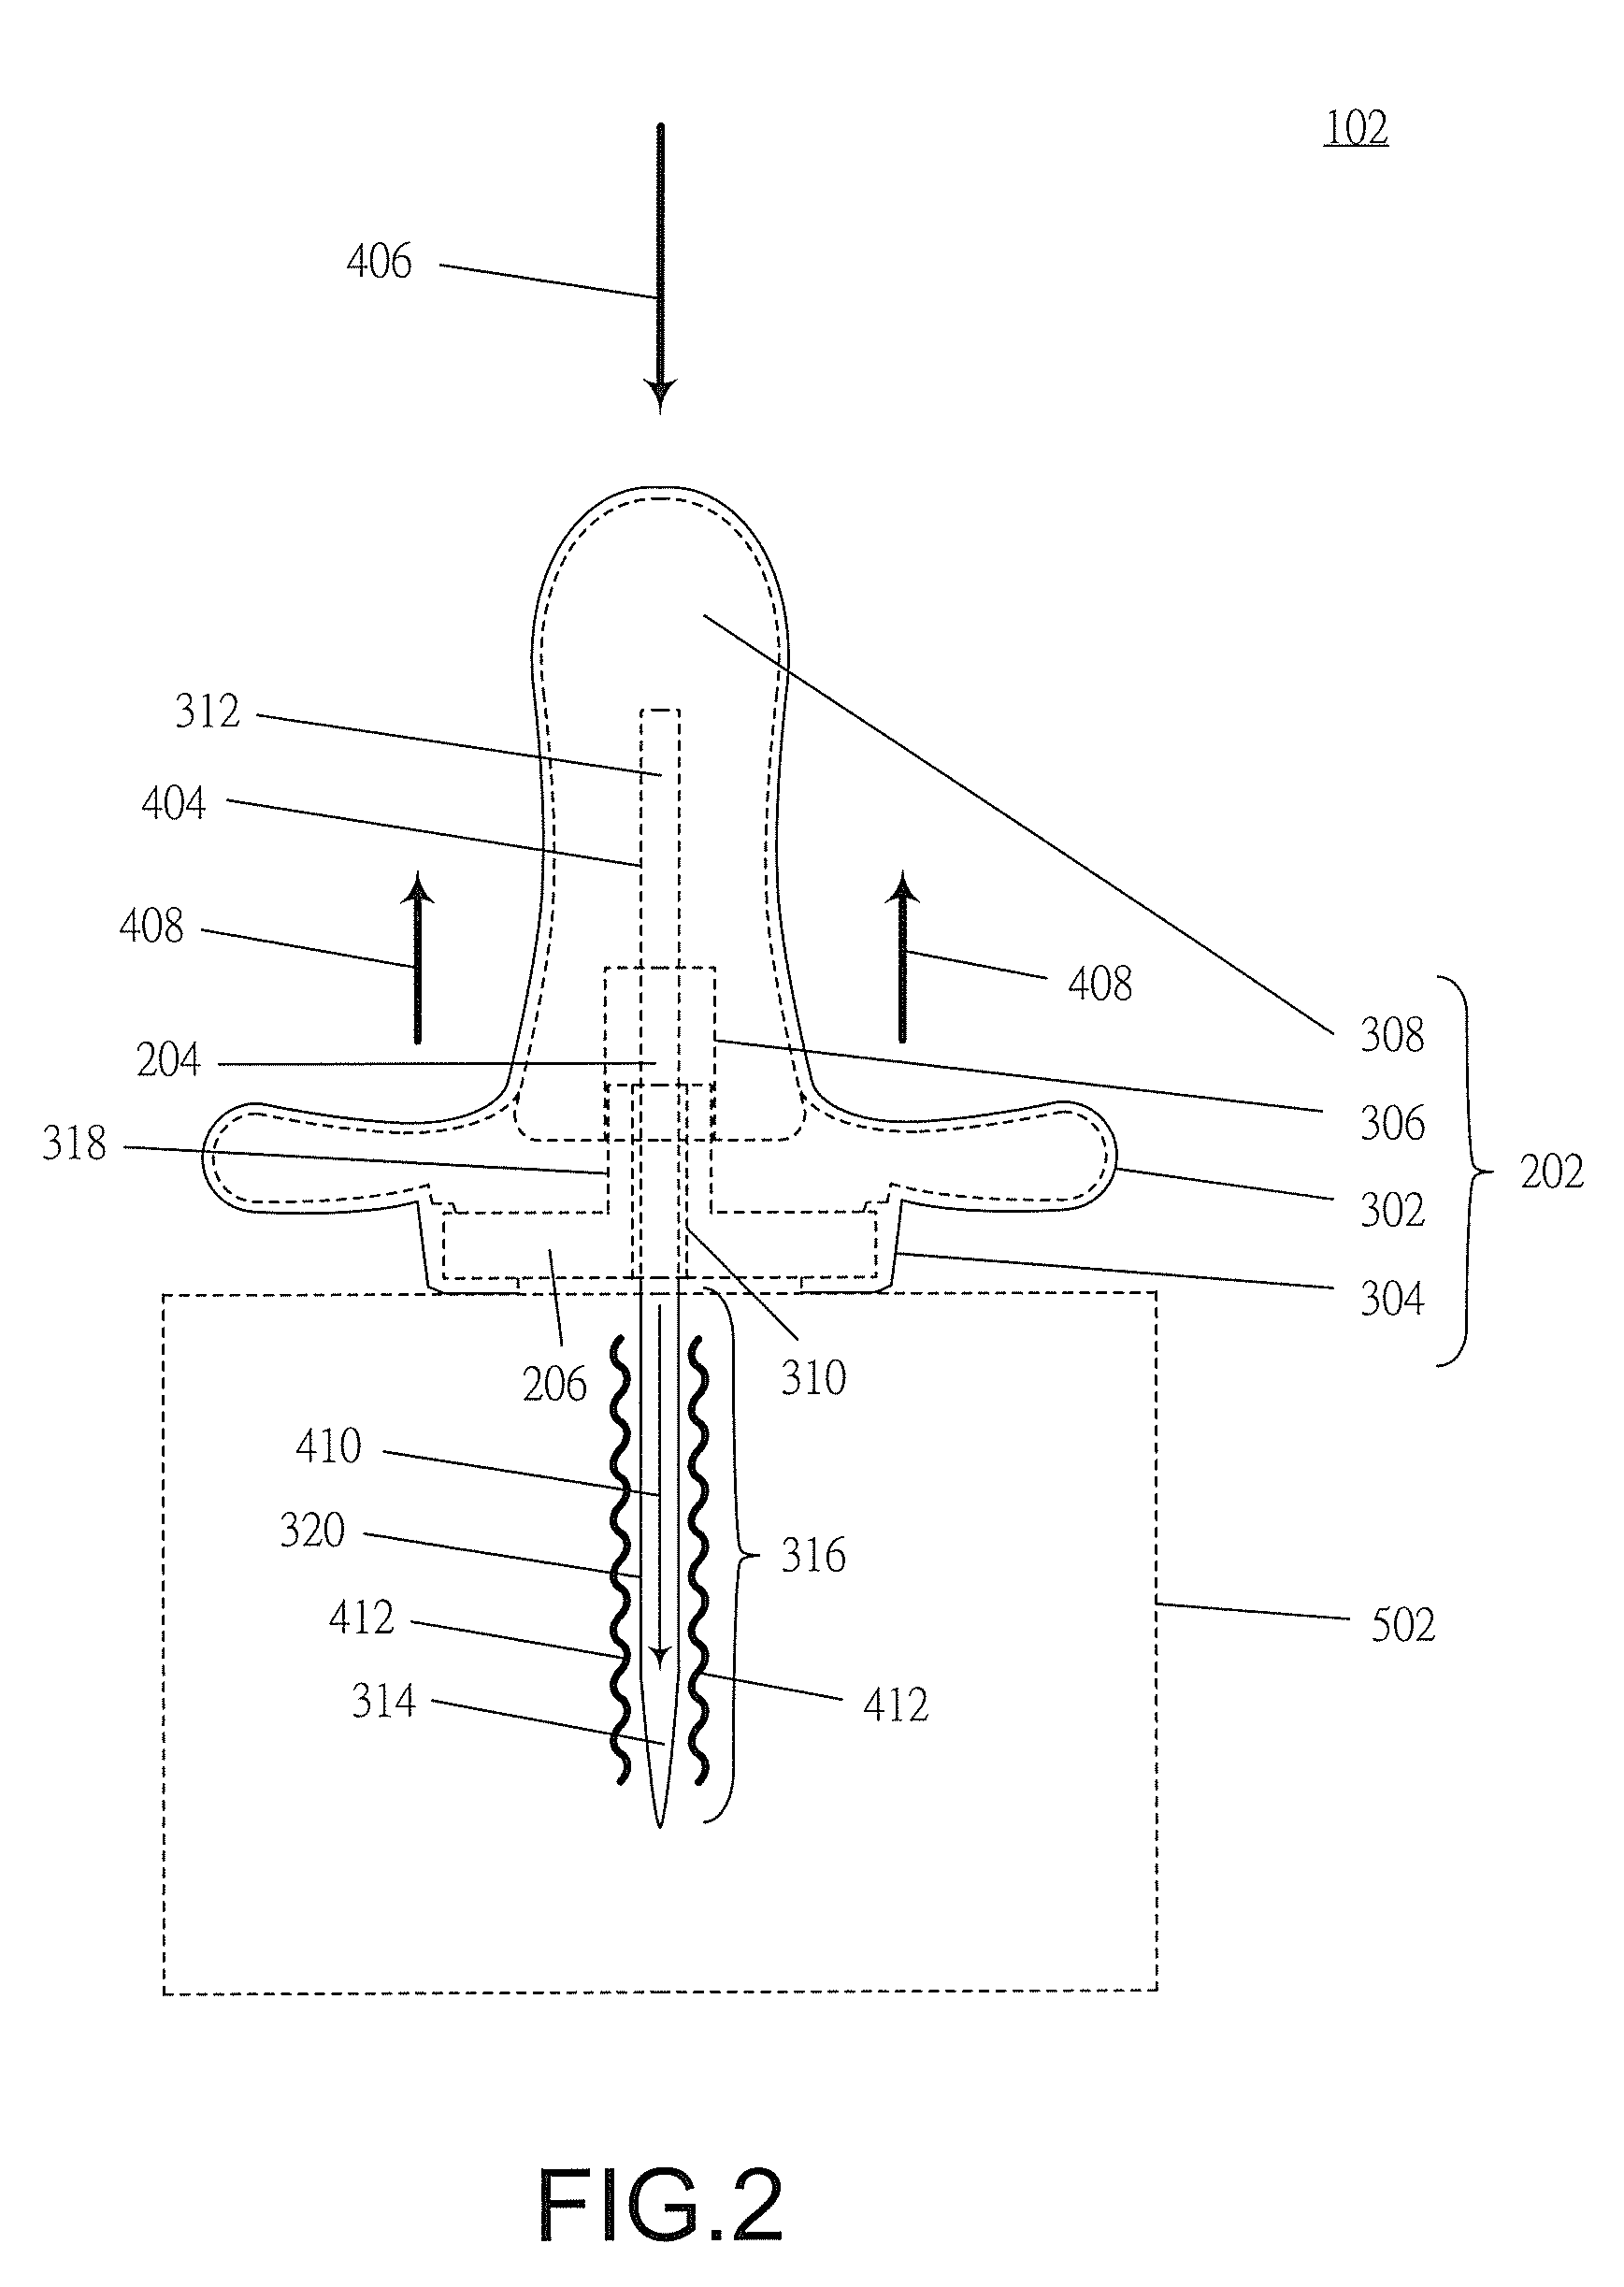 Drawing pin having functionality of drawing back automatically